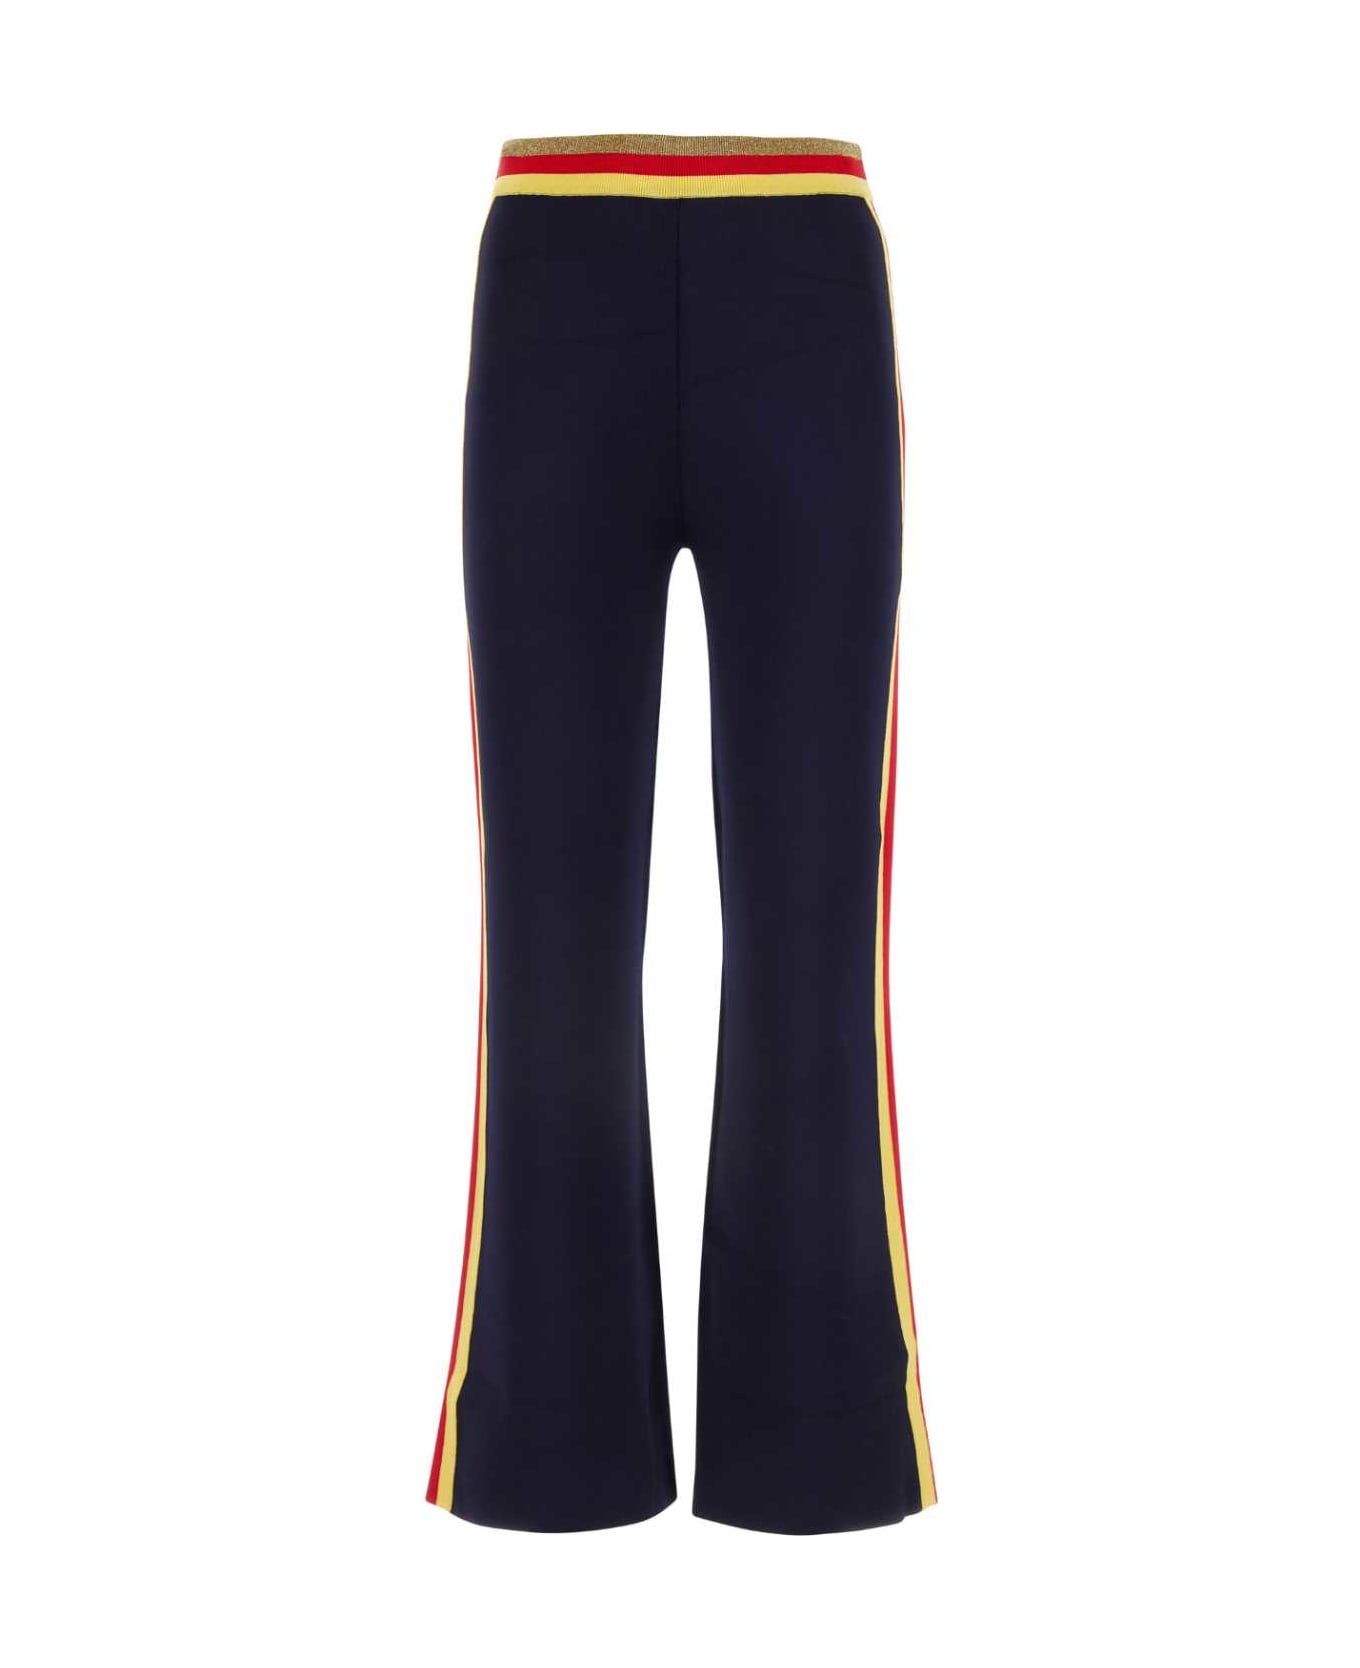 Paco Rabanne Multicolor Stretch Viscose Blend Joggers - NAVYGOLD ボトムス